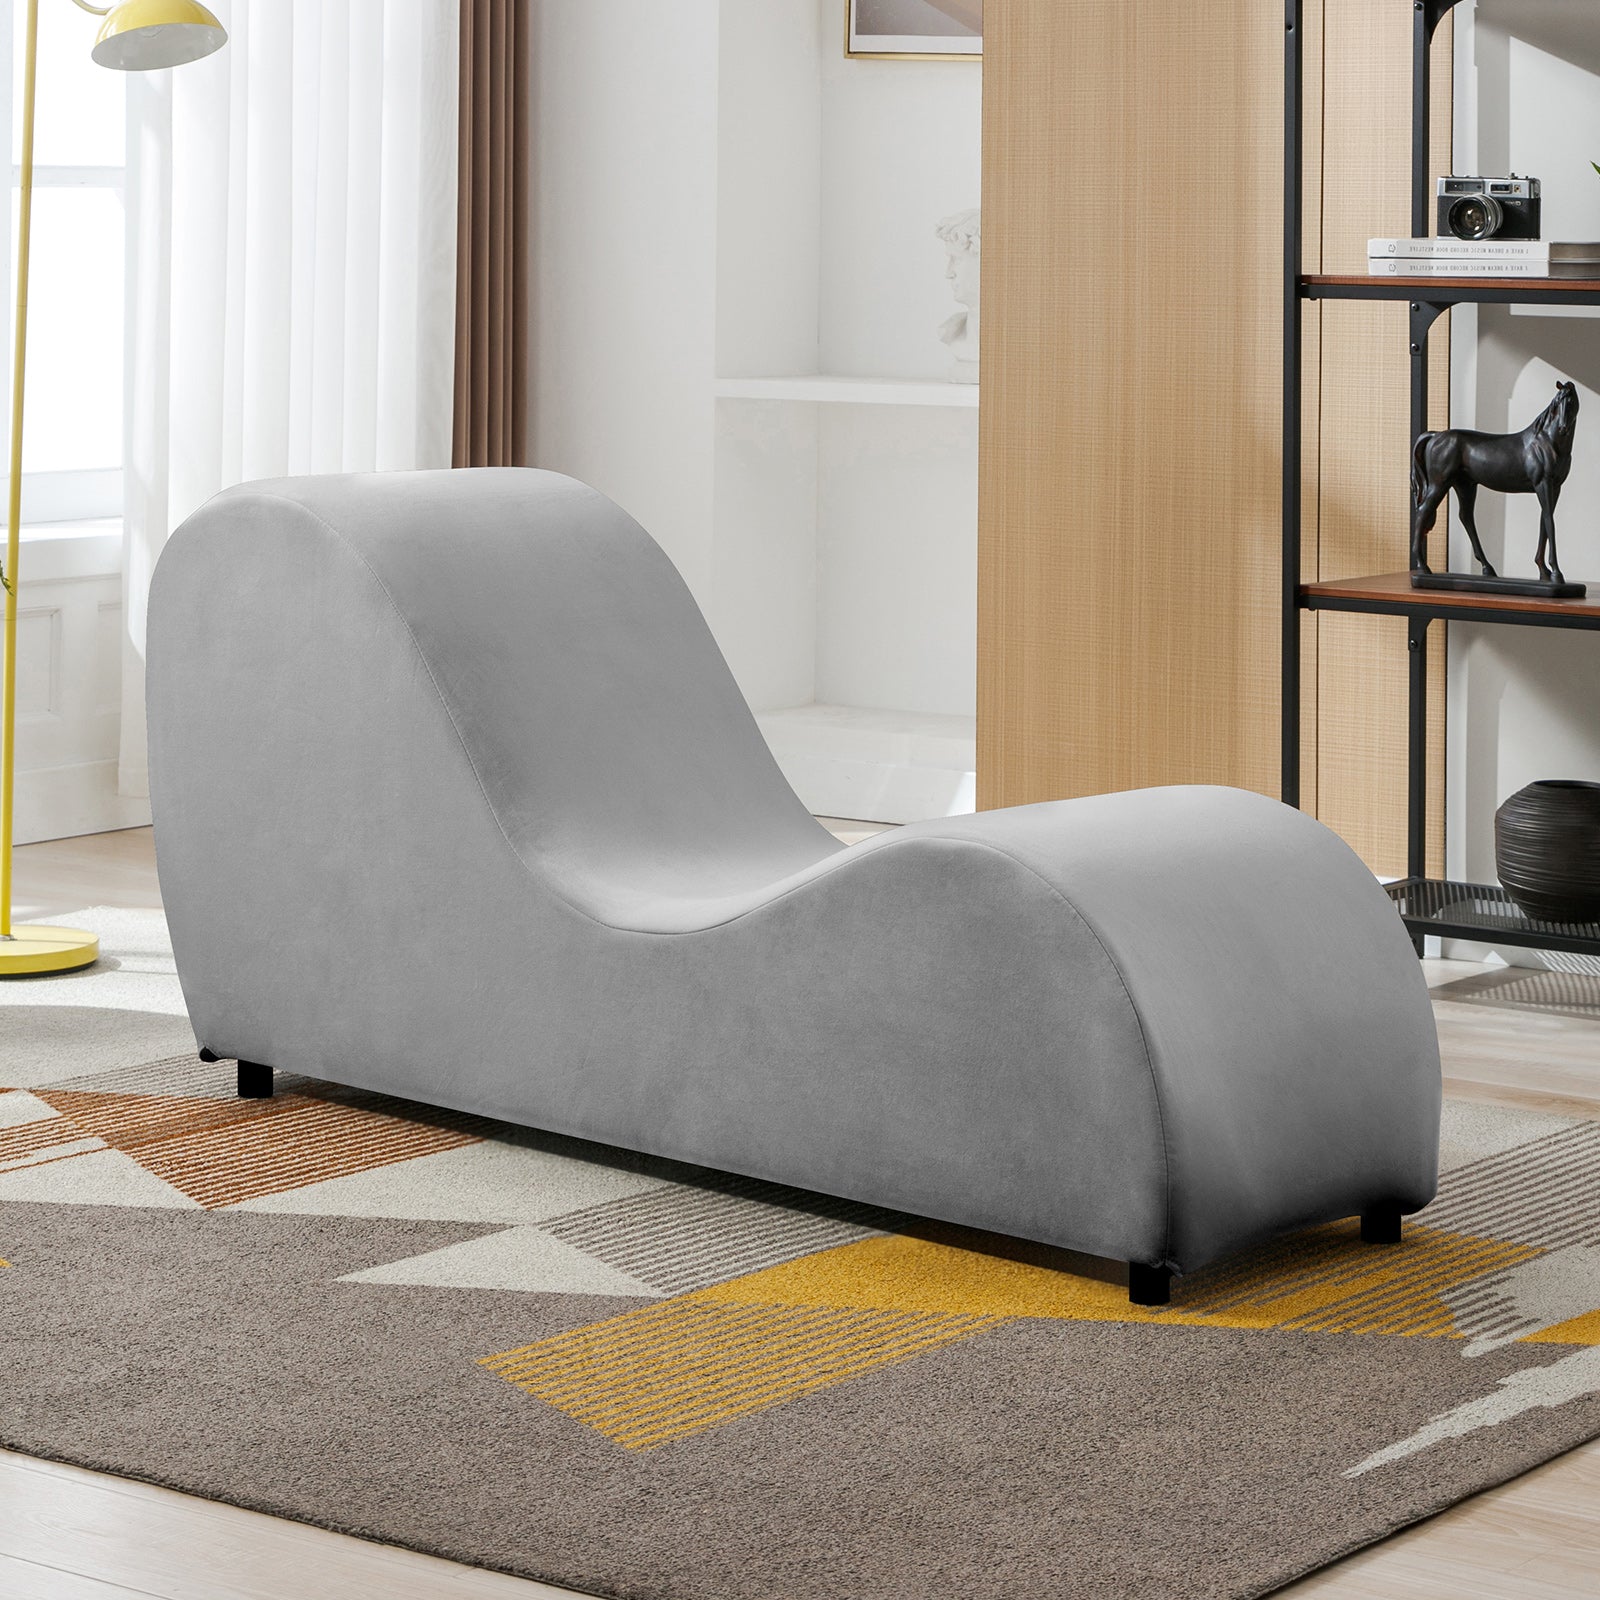 Cecer Curved Chaise Lounge Velvet Yoga Chair